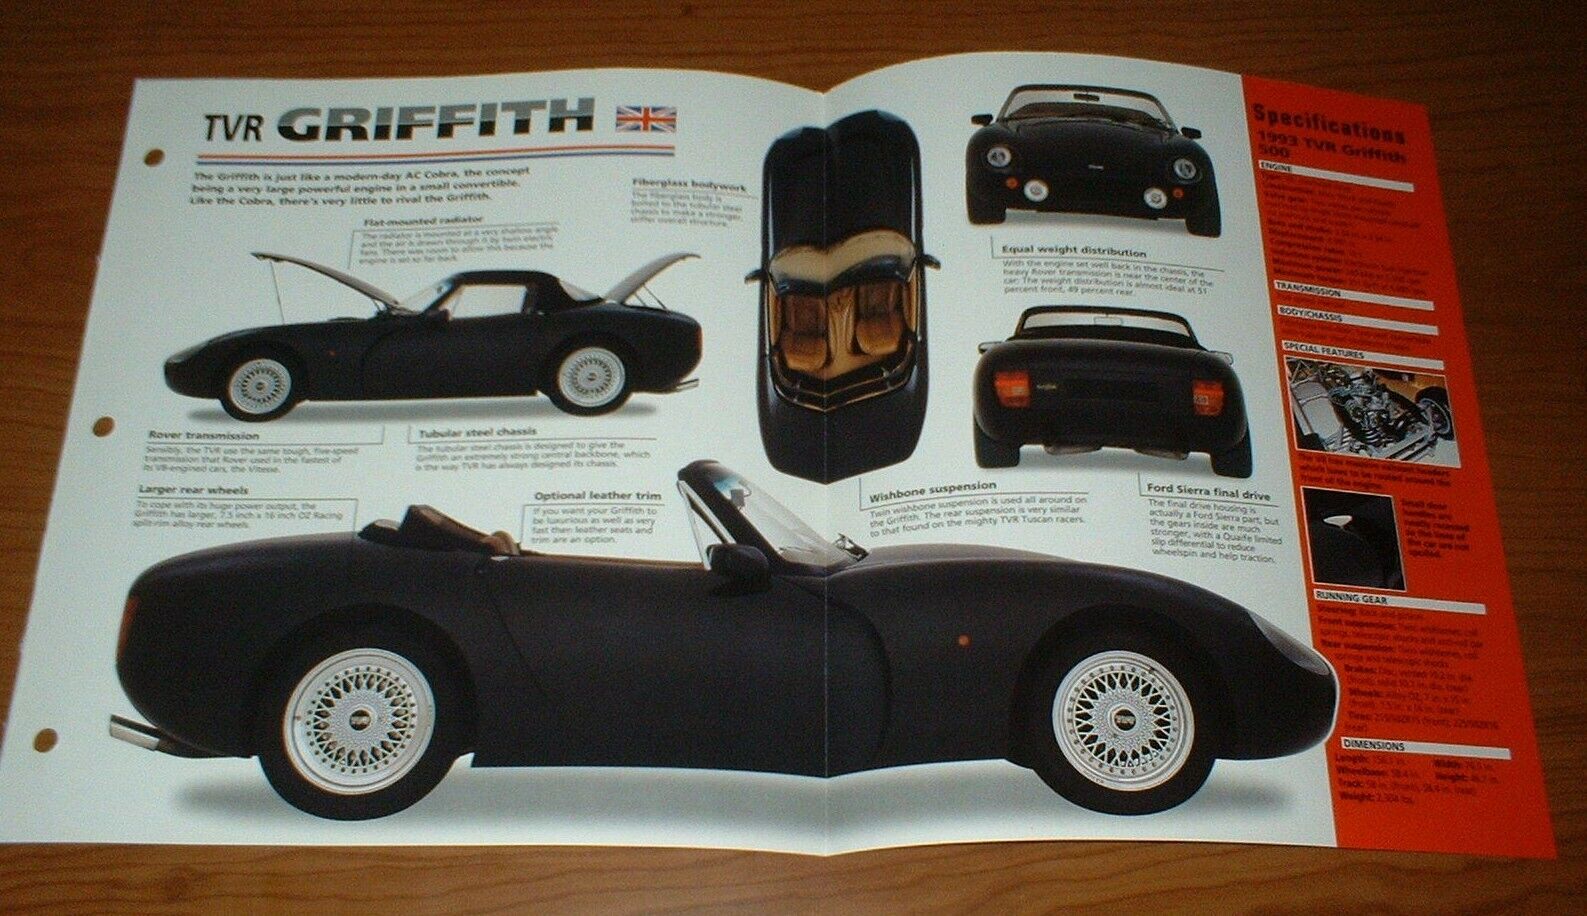 ★★1993 TVR GRIFFITH 500 SPEC SHEET BROCHURE POSTER PRINT PHOTO INFO 93 92-99★★